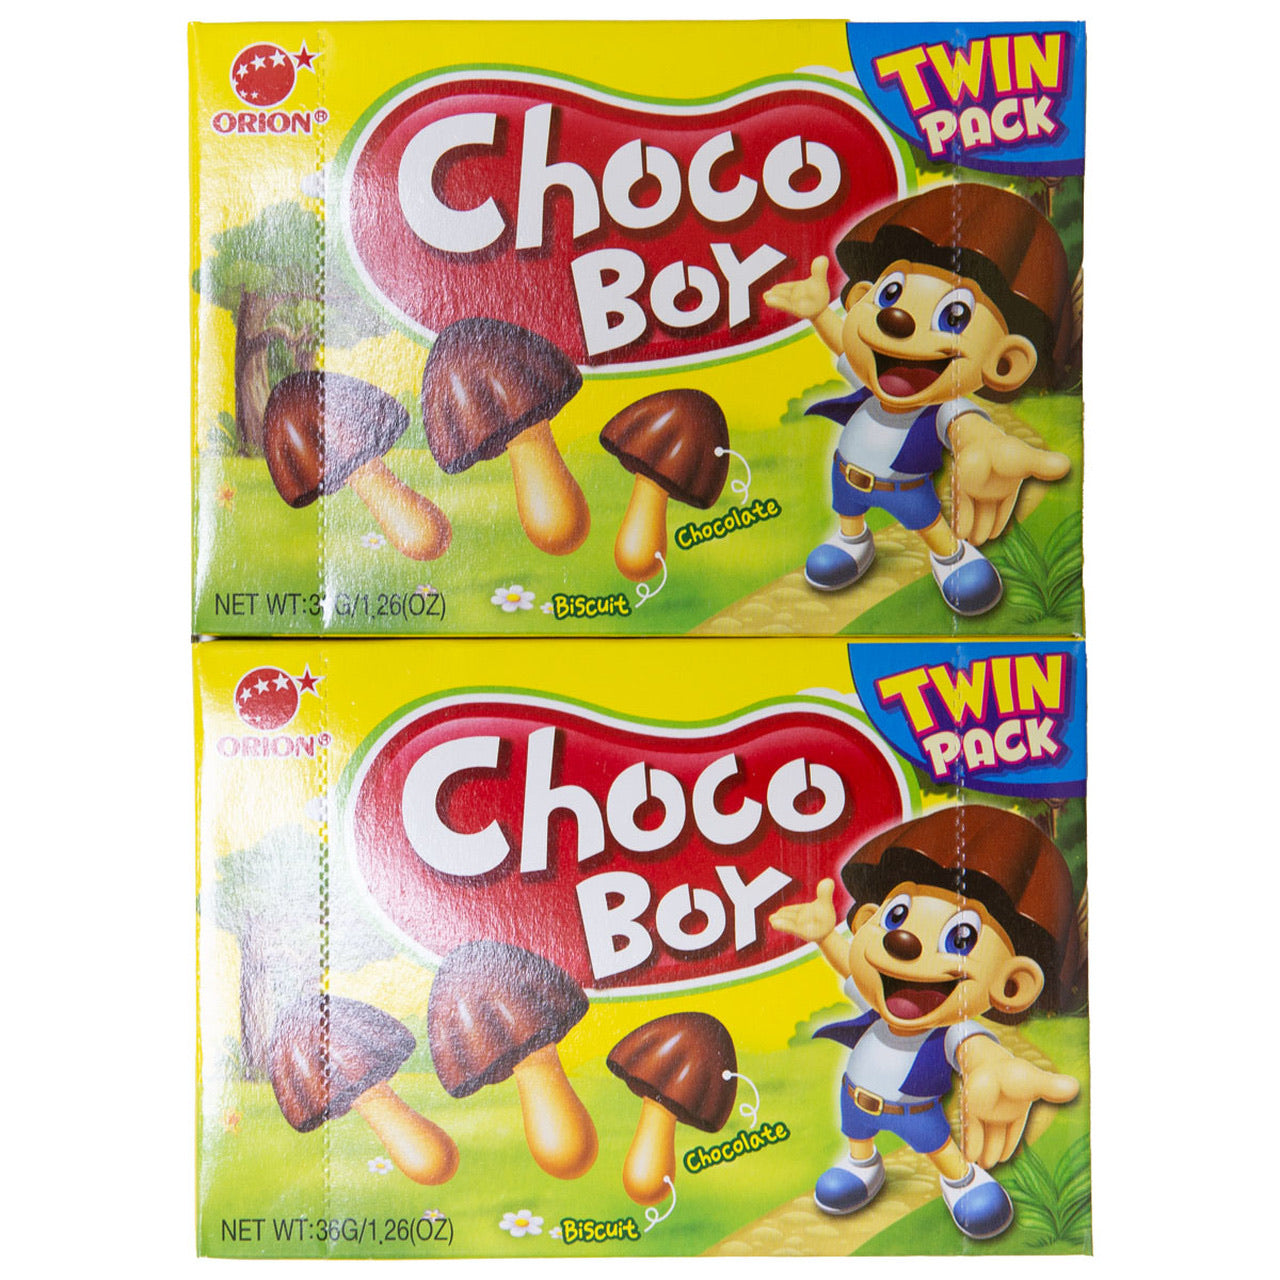 Orion Choco Boy - Twin pack